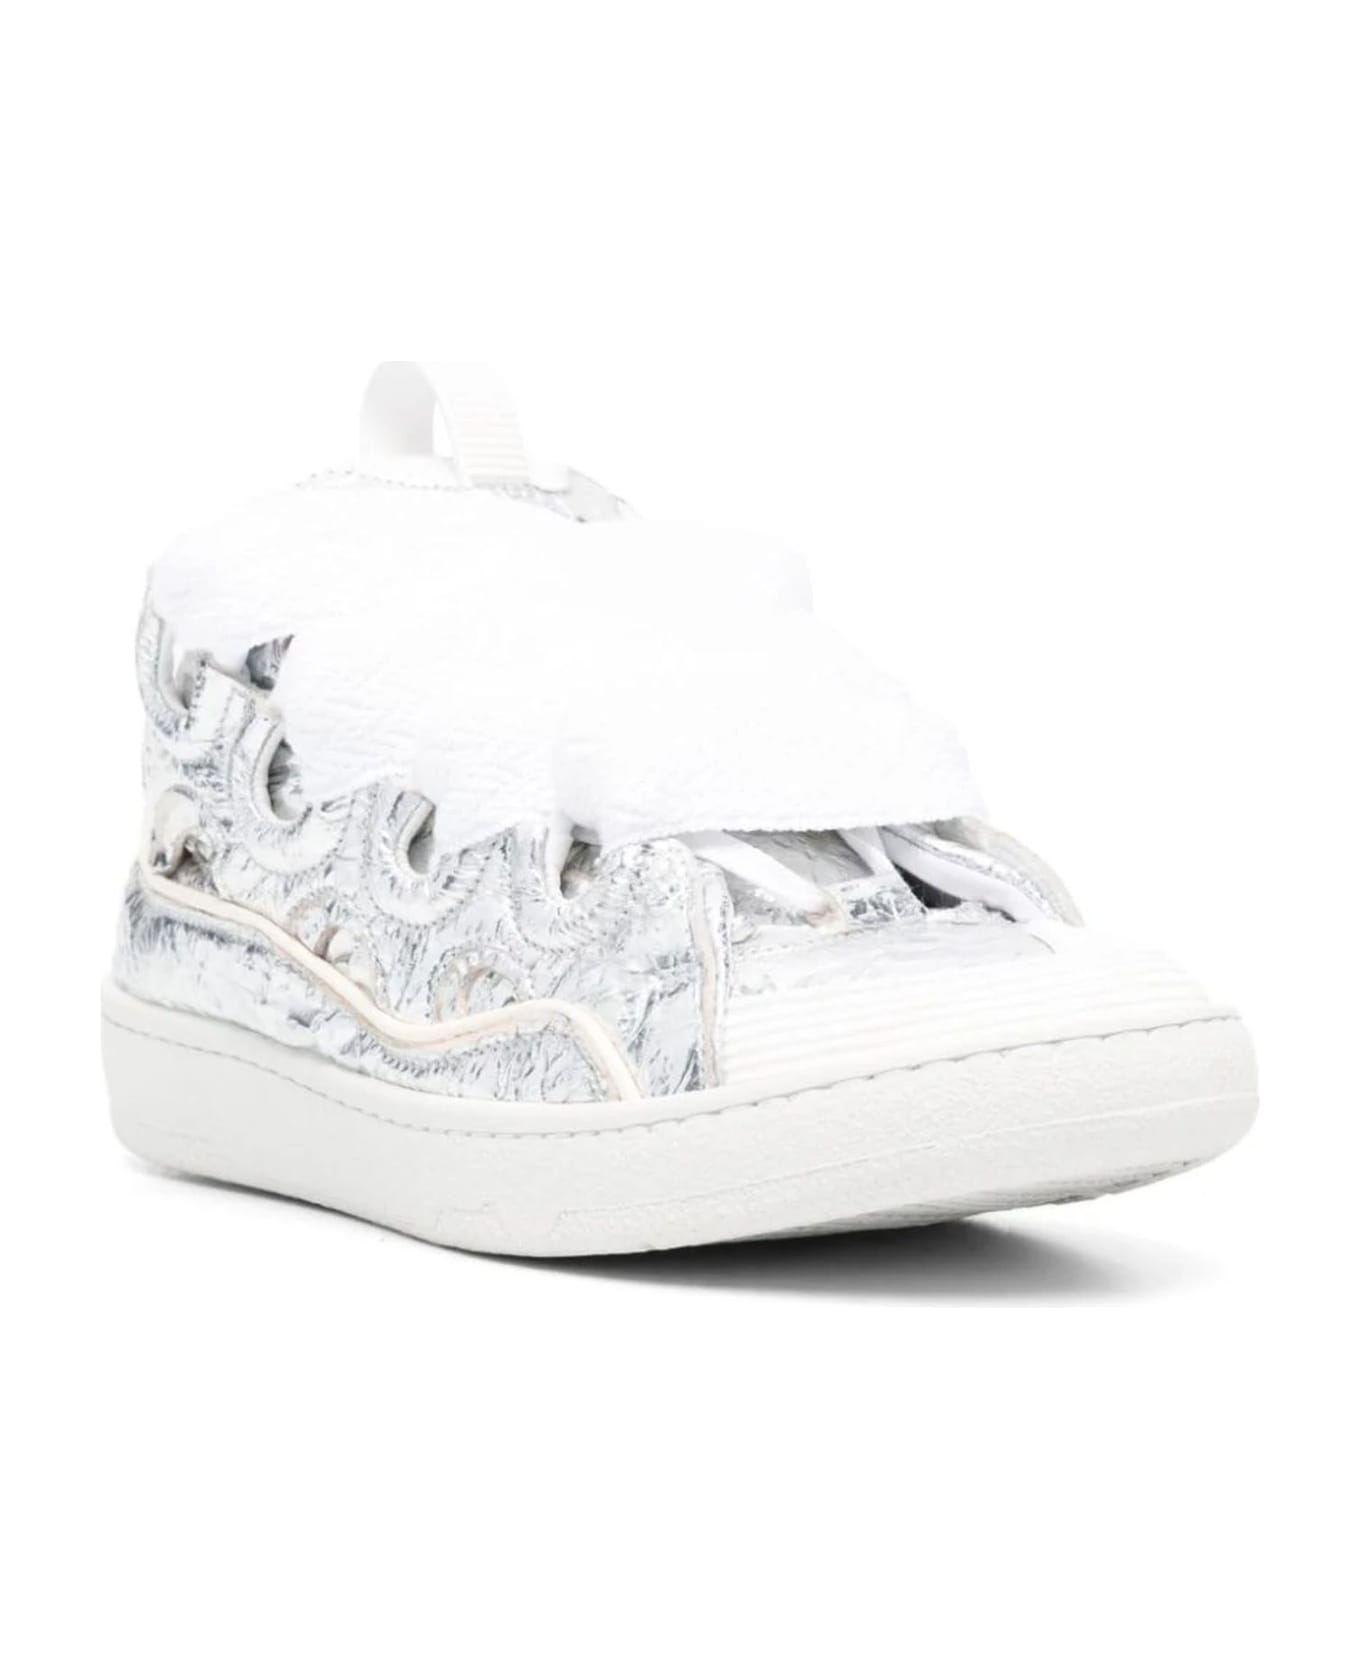 Lanvin Curb Sneakers In Crinkled Metallic Leather - Silver スニーカー